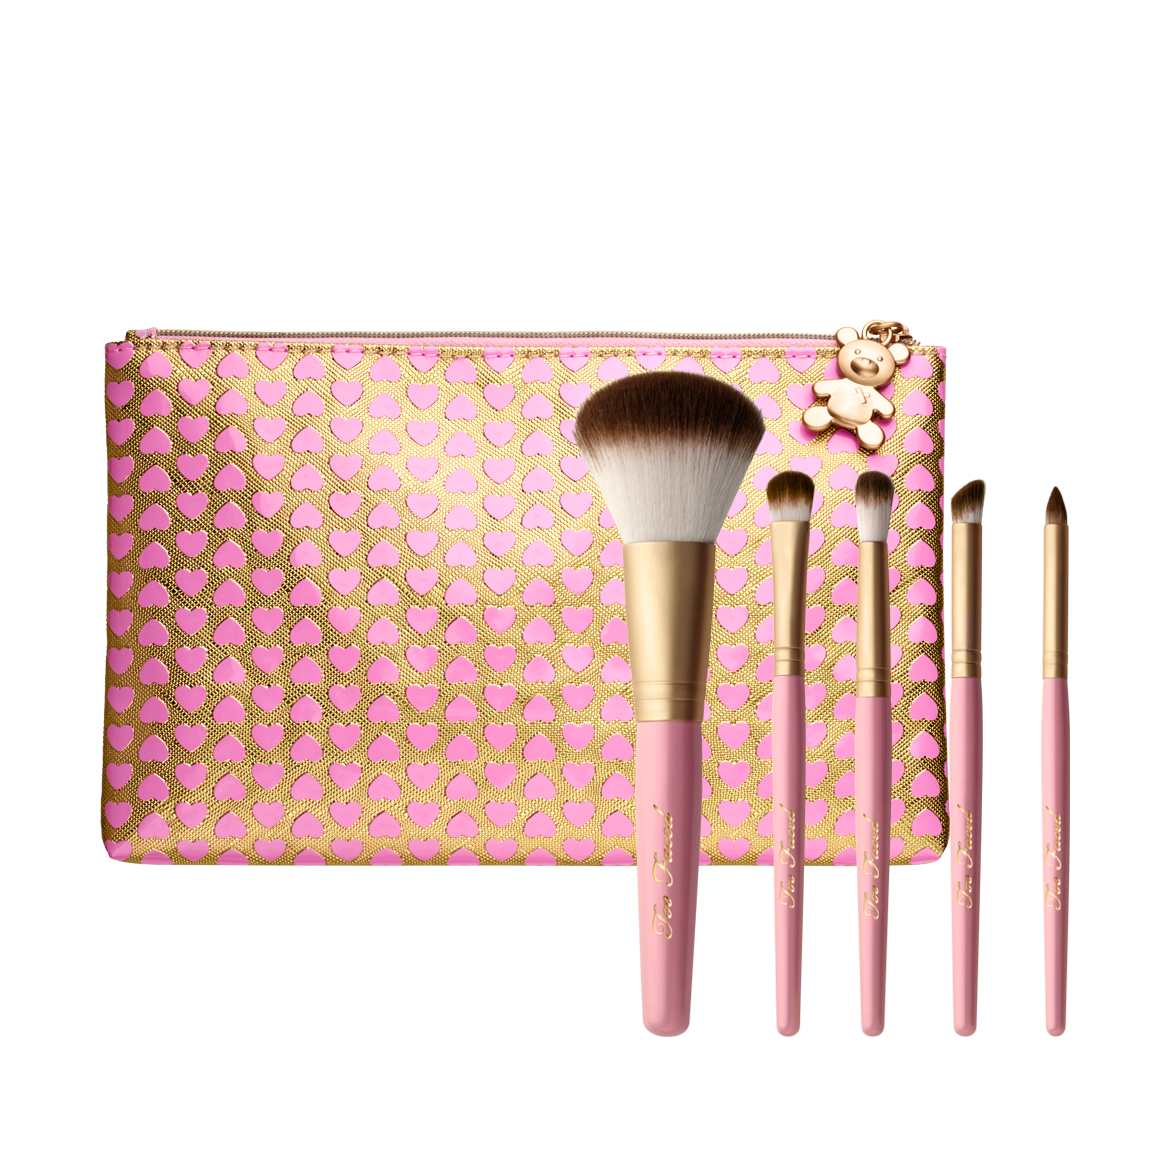 Quinceanera image: A set of makeup brushes and a pouch from Too Faced, featuring a teddy bear design